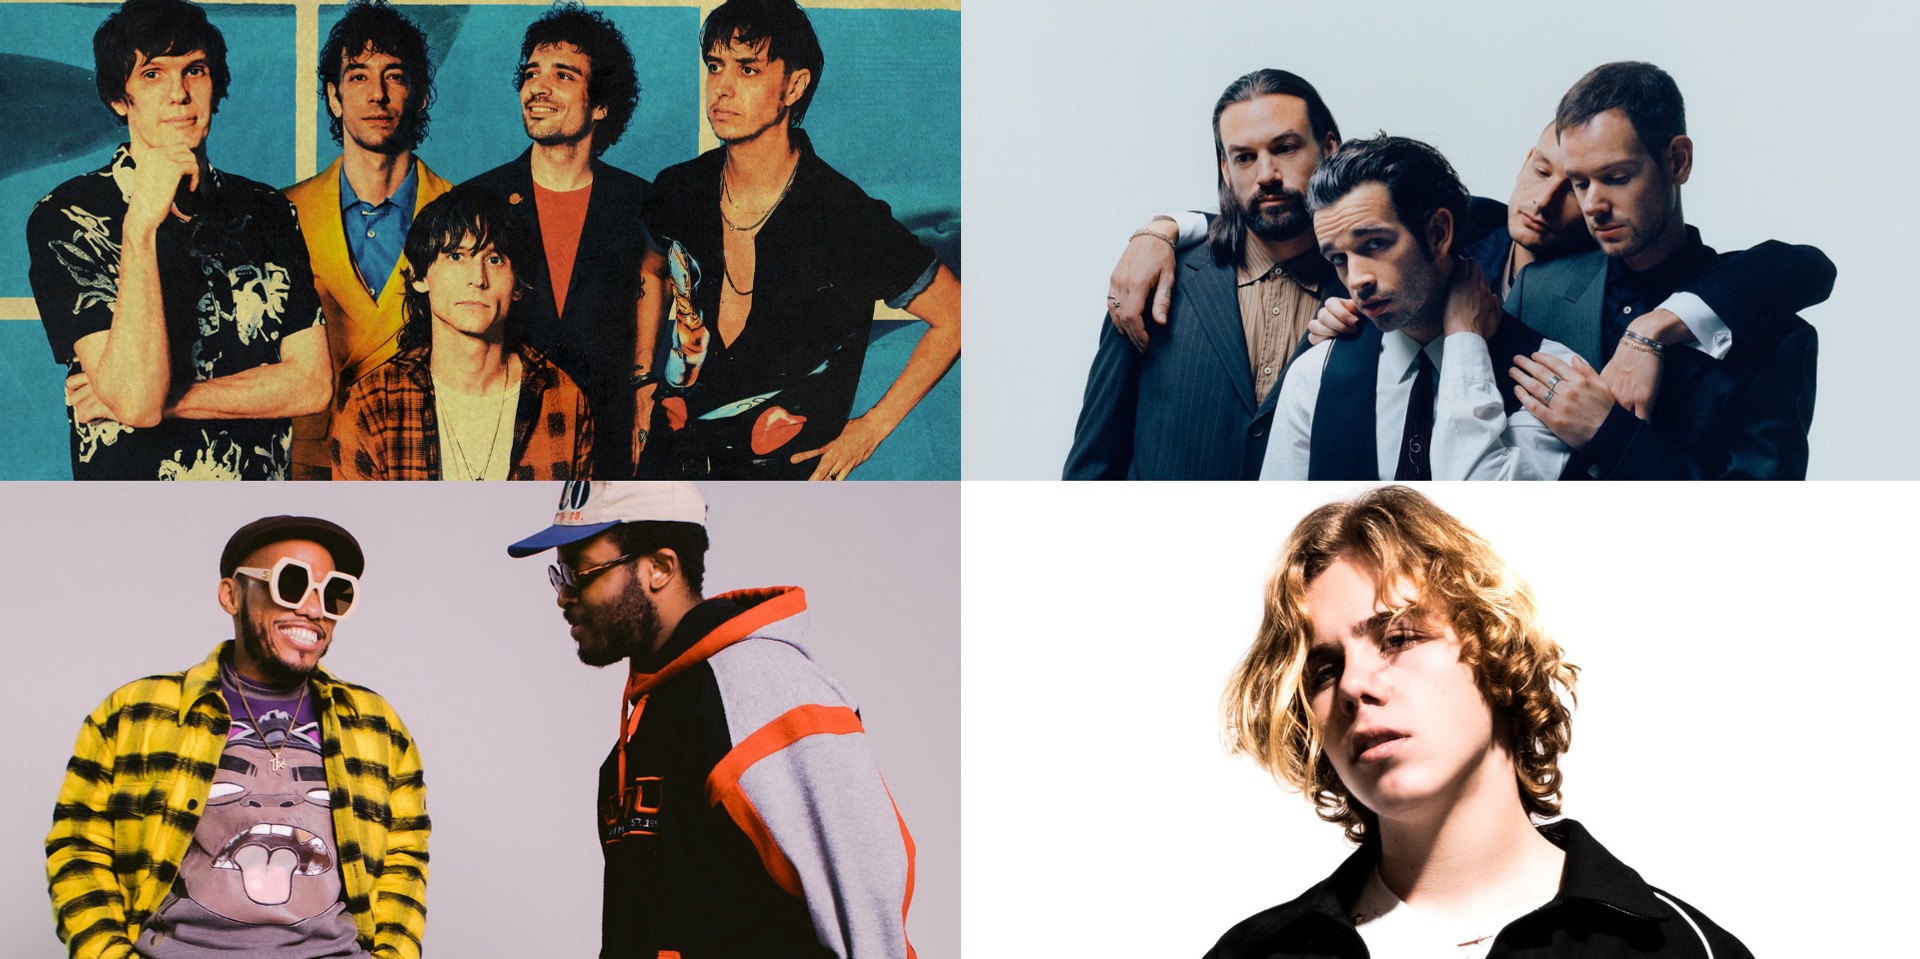 We The Fest 2023 announces phase 1 lineup – The Strokes, The 1975, NxWorries, The Kid Laroi, and more 